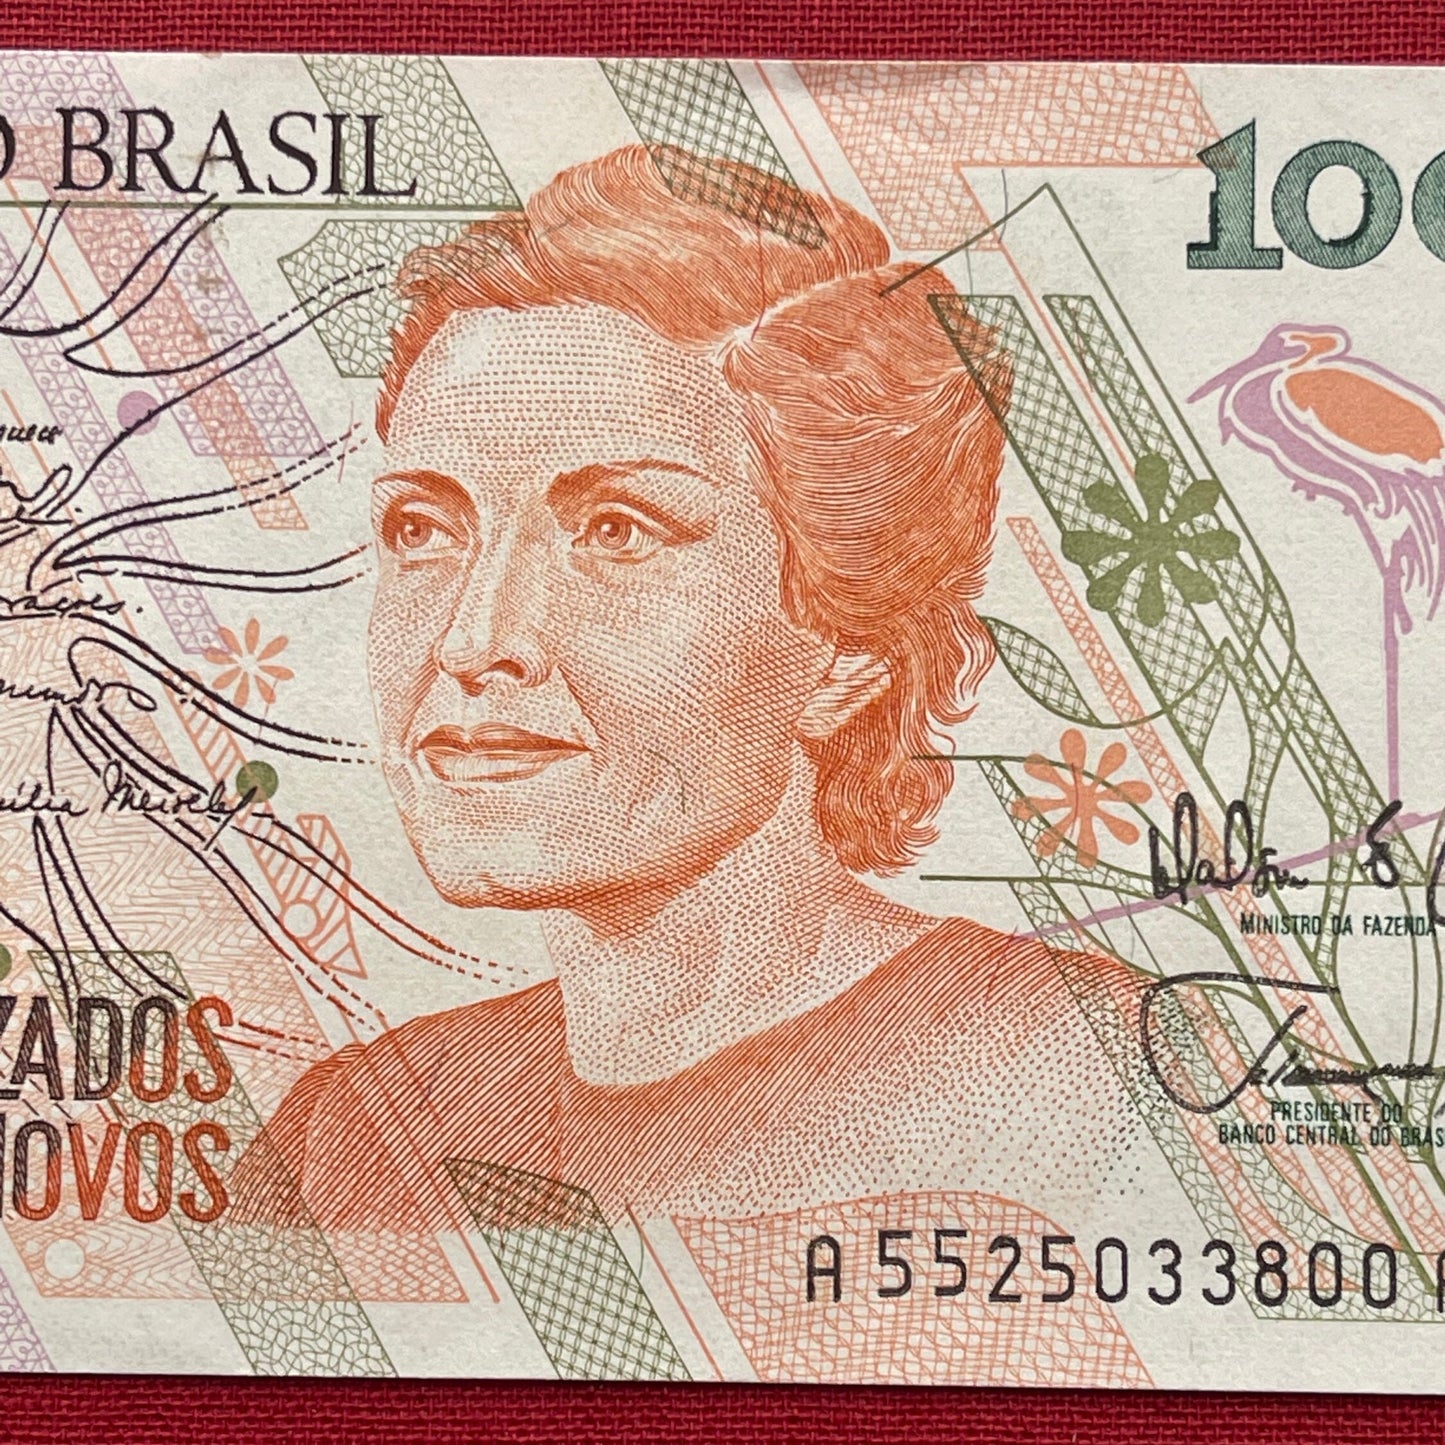 Poet Cecília Meireles 100 Cruzados Novos Brazil Authentic Banknote Money for Jewelry Crafts and Collage (Teacher) (Education Reform)